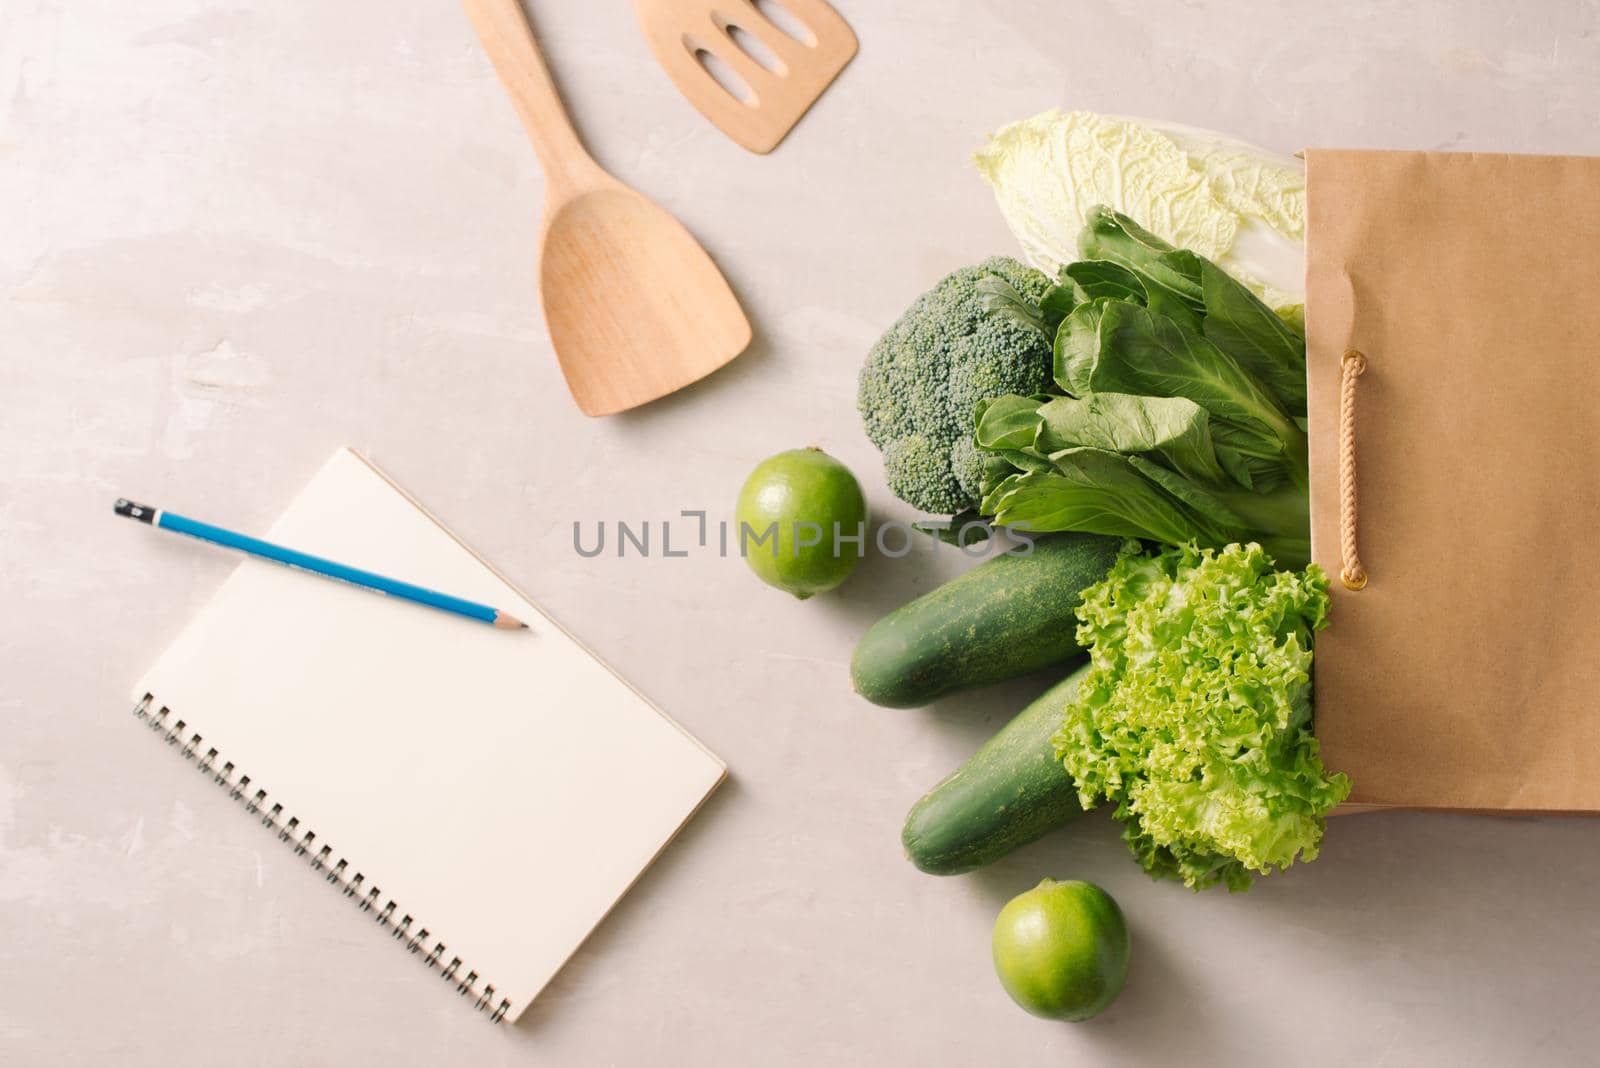 Paper bag full of healthy food with notepads on a gray background. Top view. Flat lay